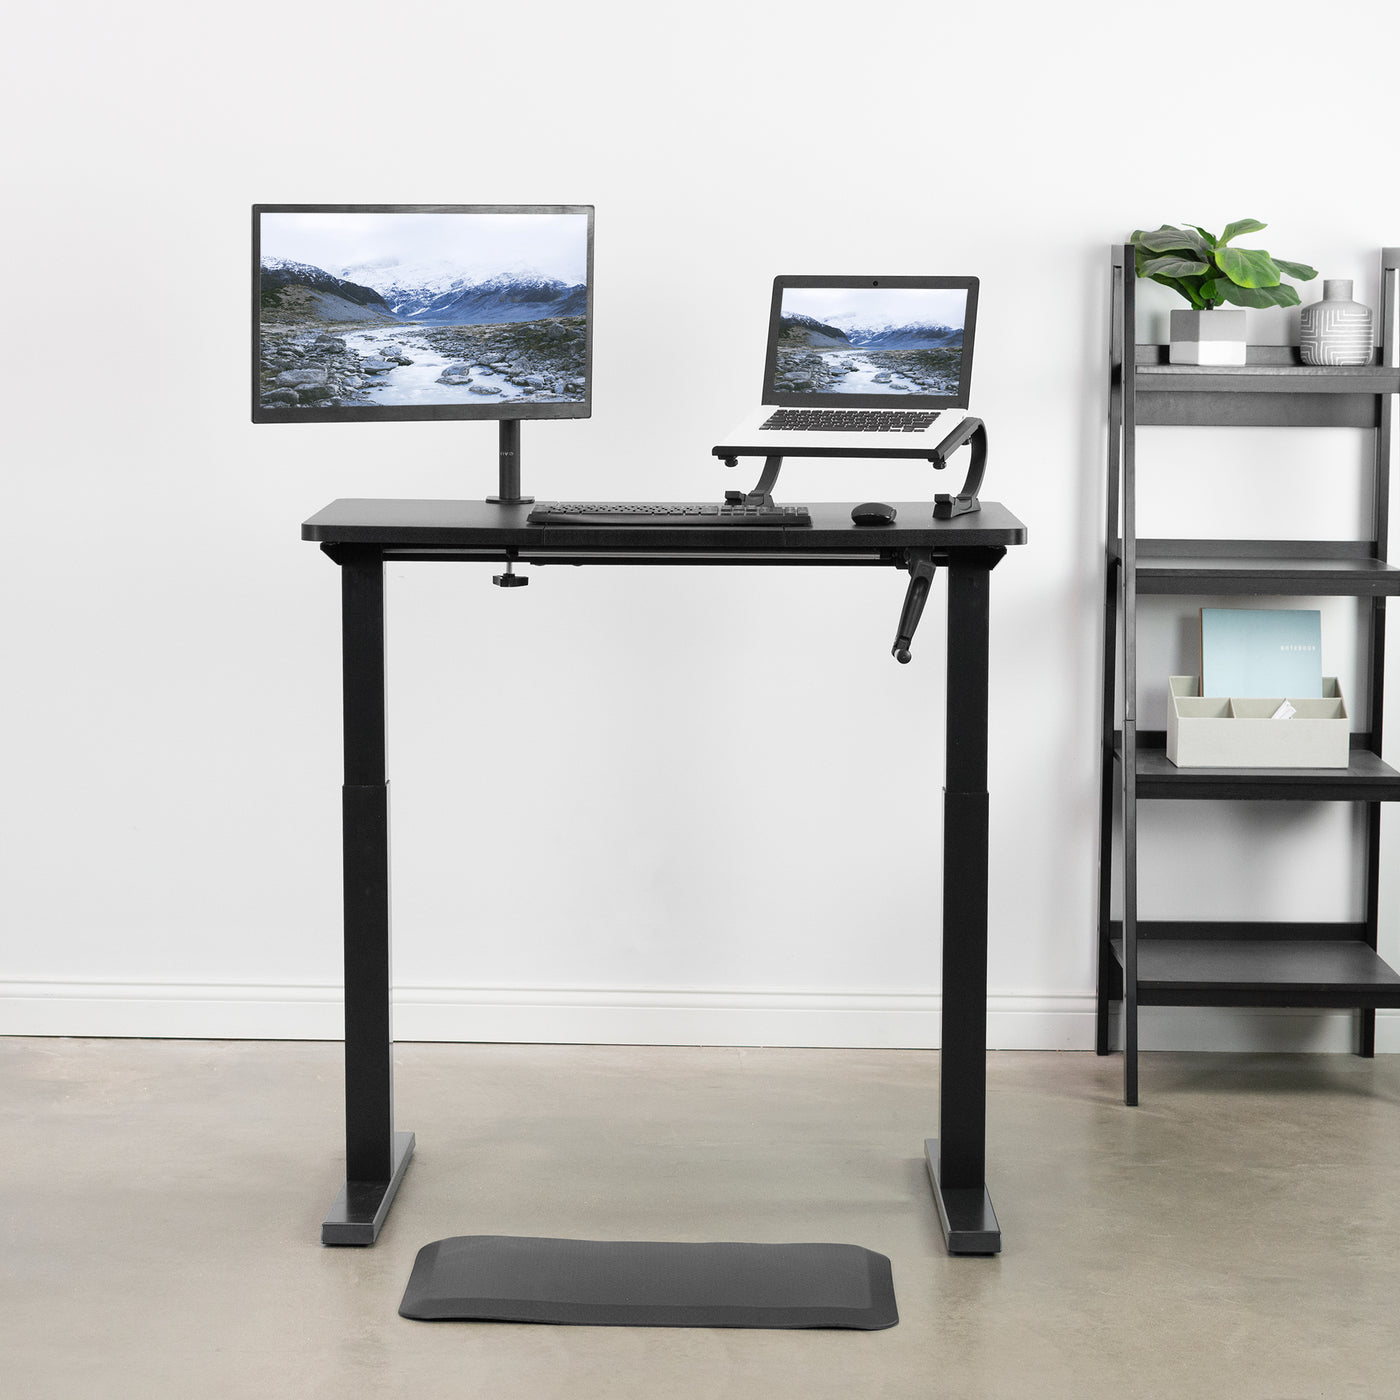 Foam standing mat to enhance the longevity of working while standing.